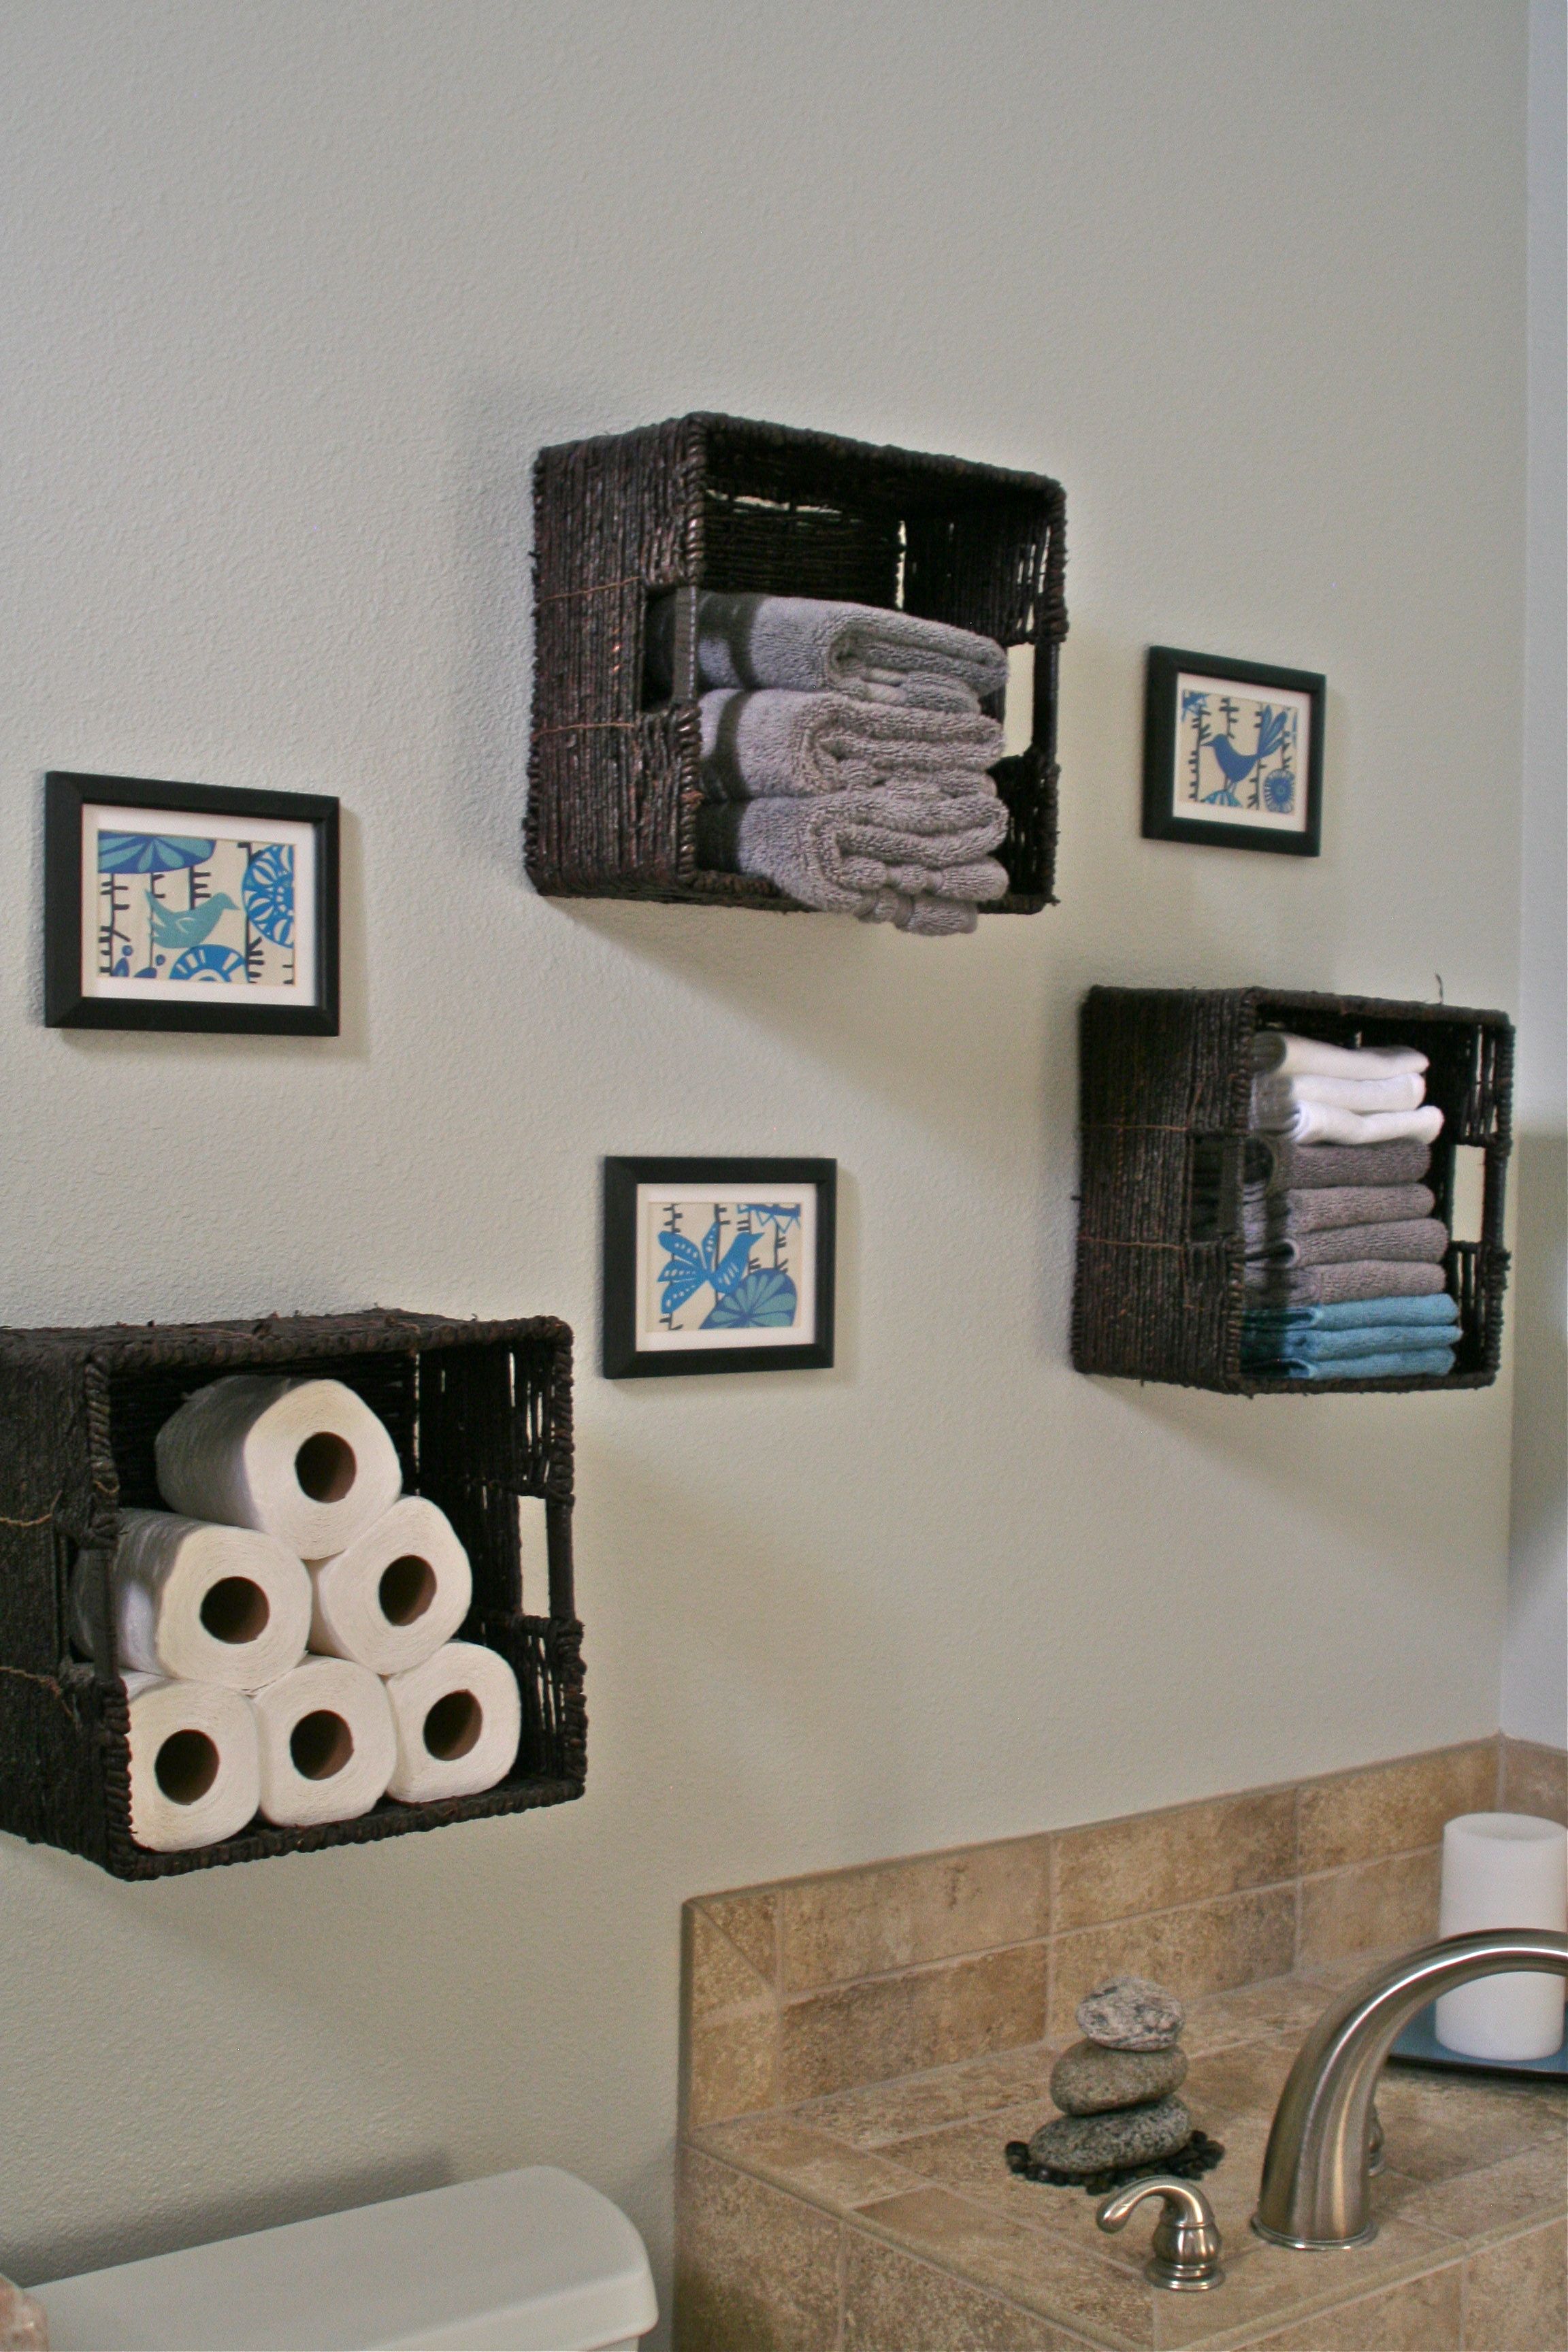 Bathroom storage - baskets for towels, toilet paper etc Love the ...